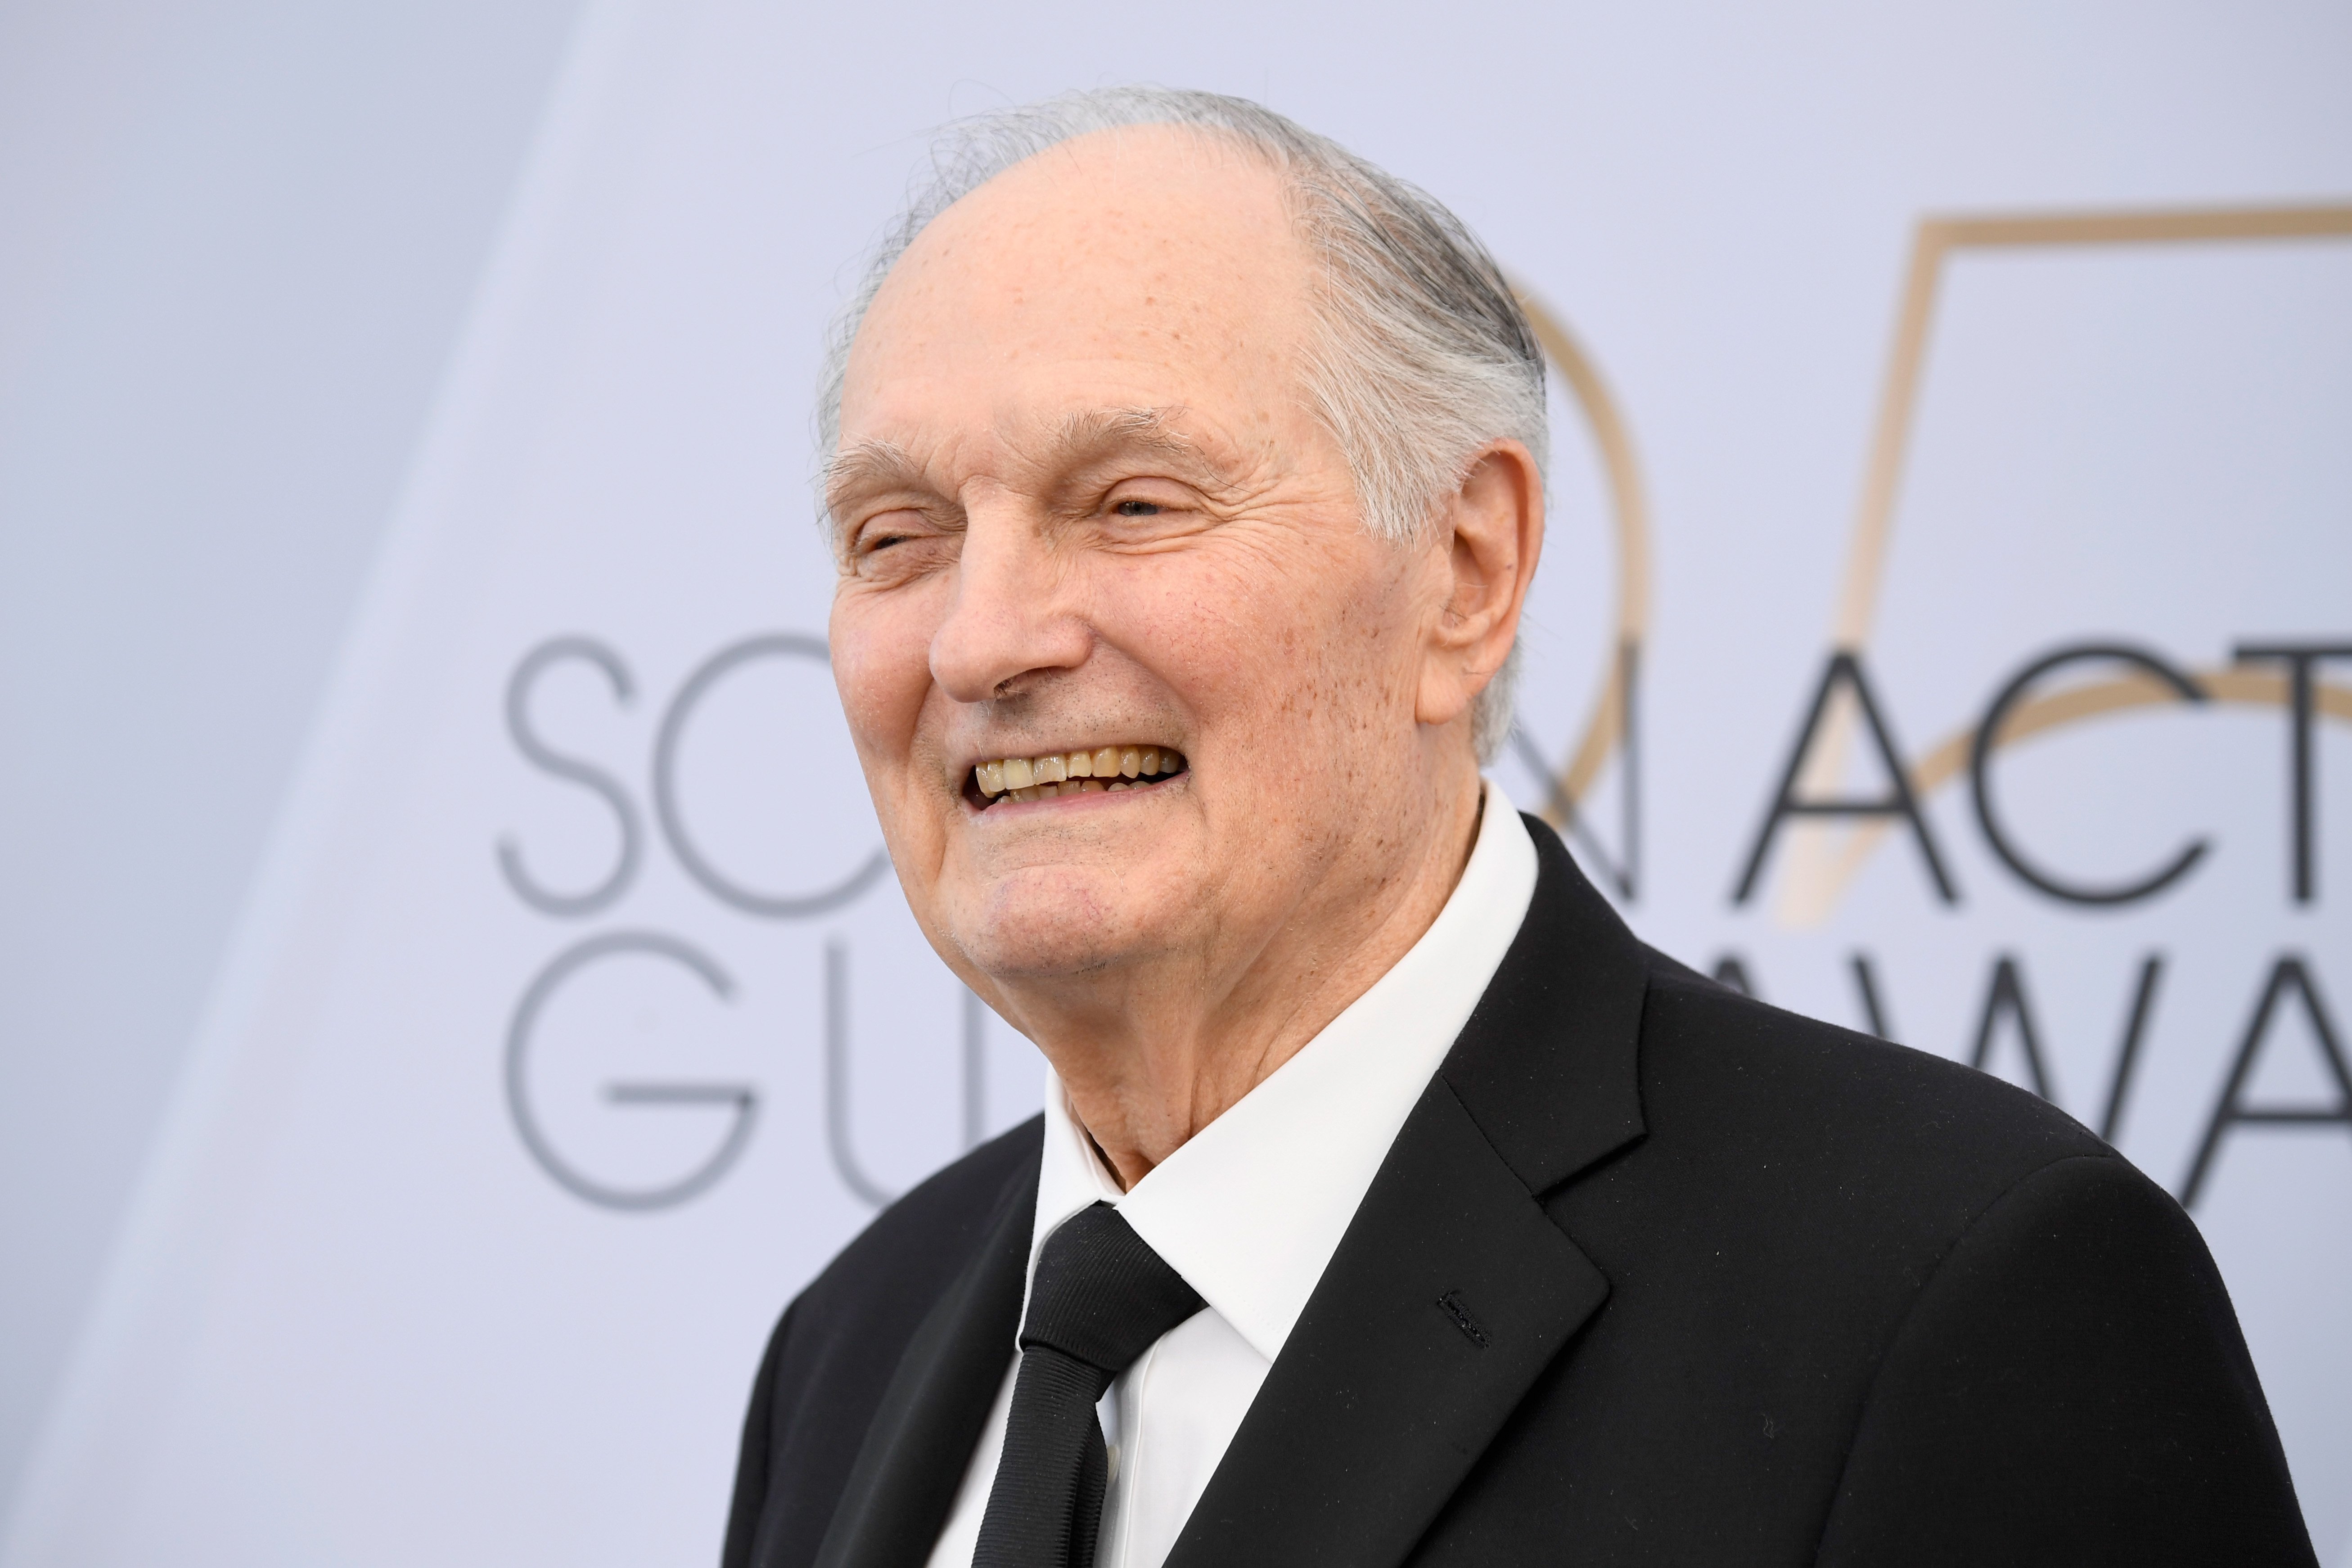 Alan Alda pictured at the 25th Annual Screen Actors Guild Awards at The Shrine Auditorium, 2019, Los Angeles, California. | Photo: Getty Images